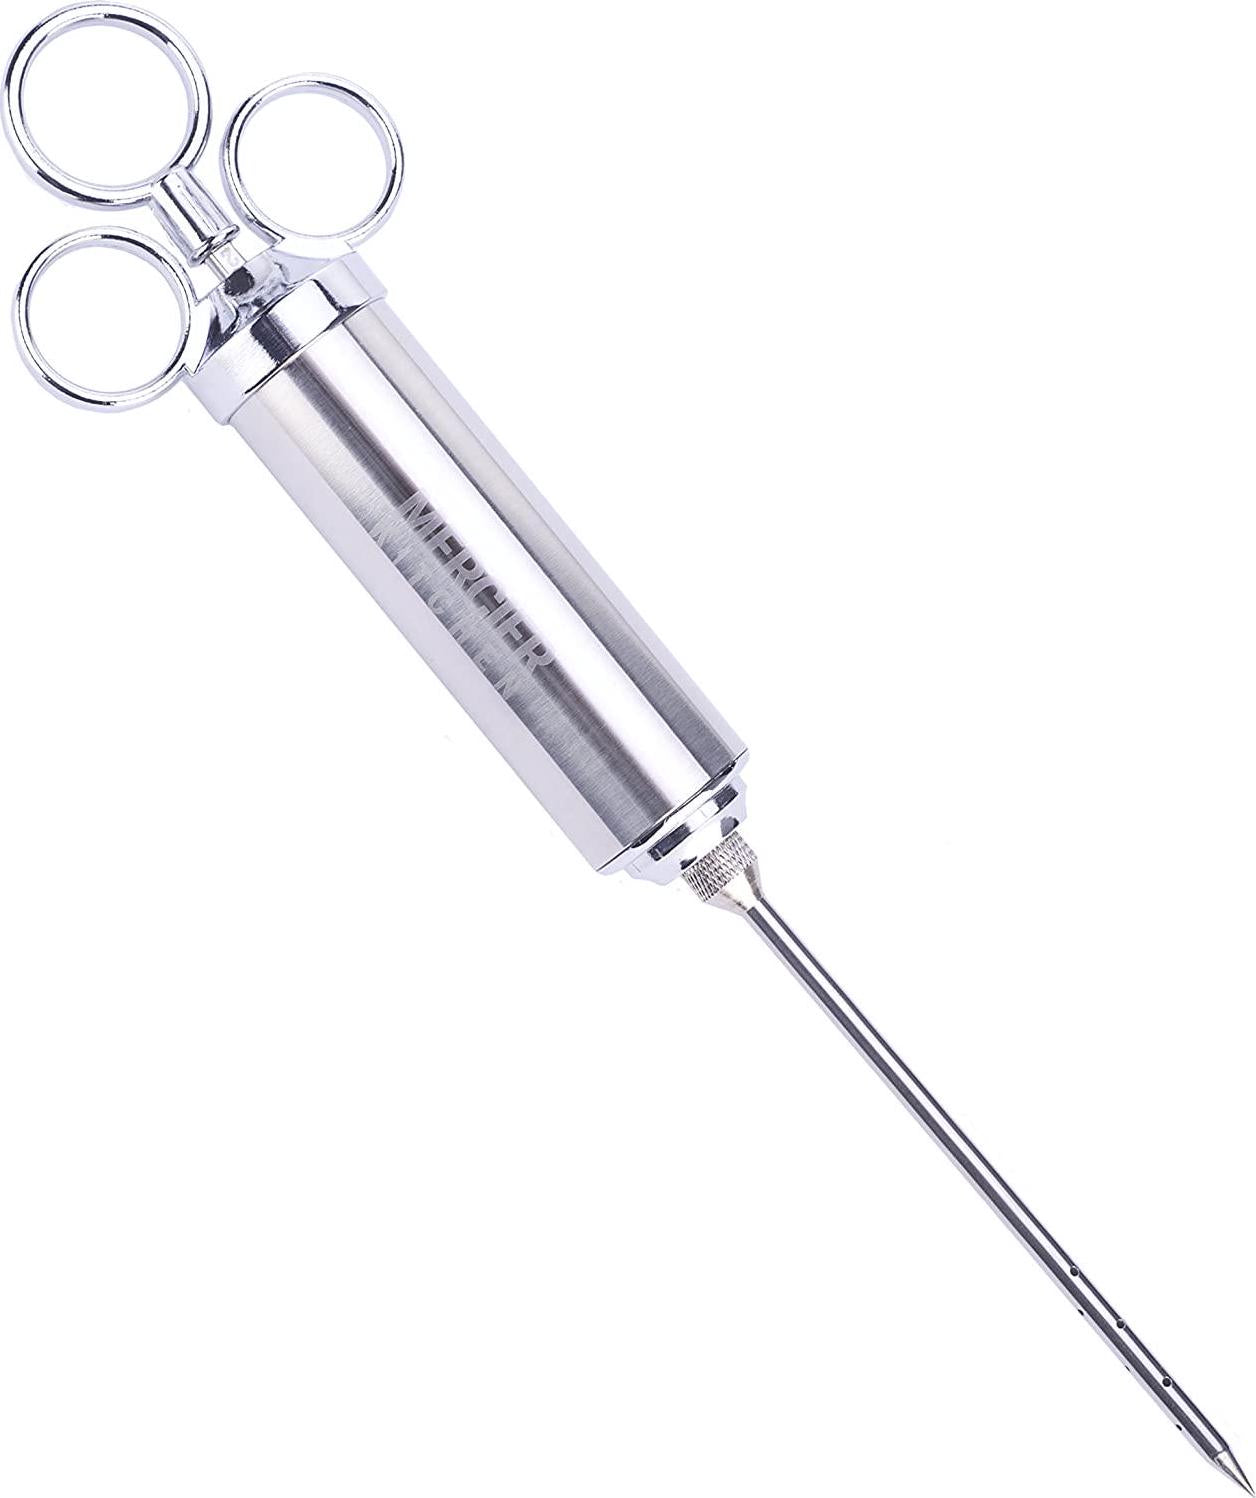 Mercier Kitchen, Mercier Kitchen Stainless Steel Heavy Duty Meat Marinade Injector with 2-Oz Large Capacity Barrel and 3 Marinade Needles